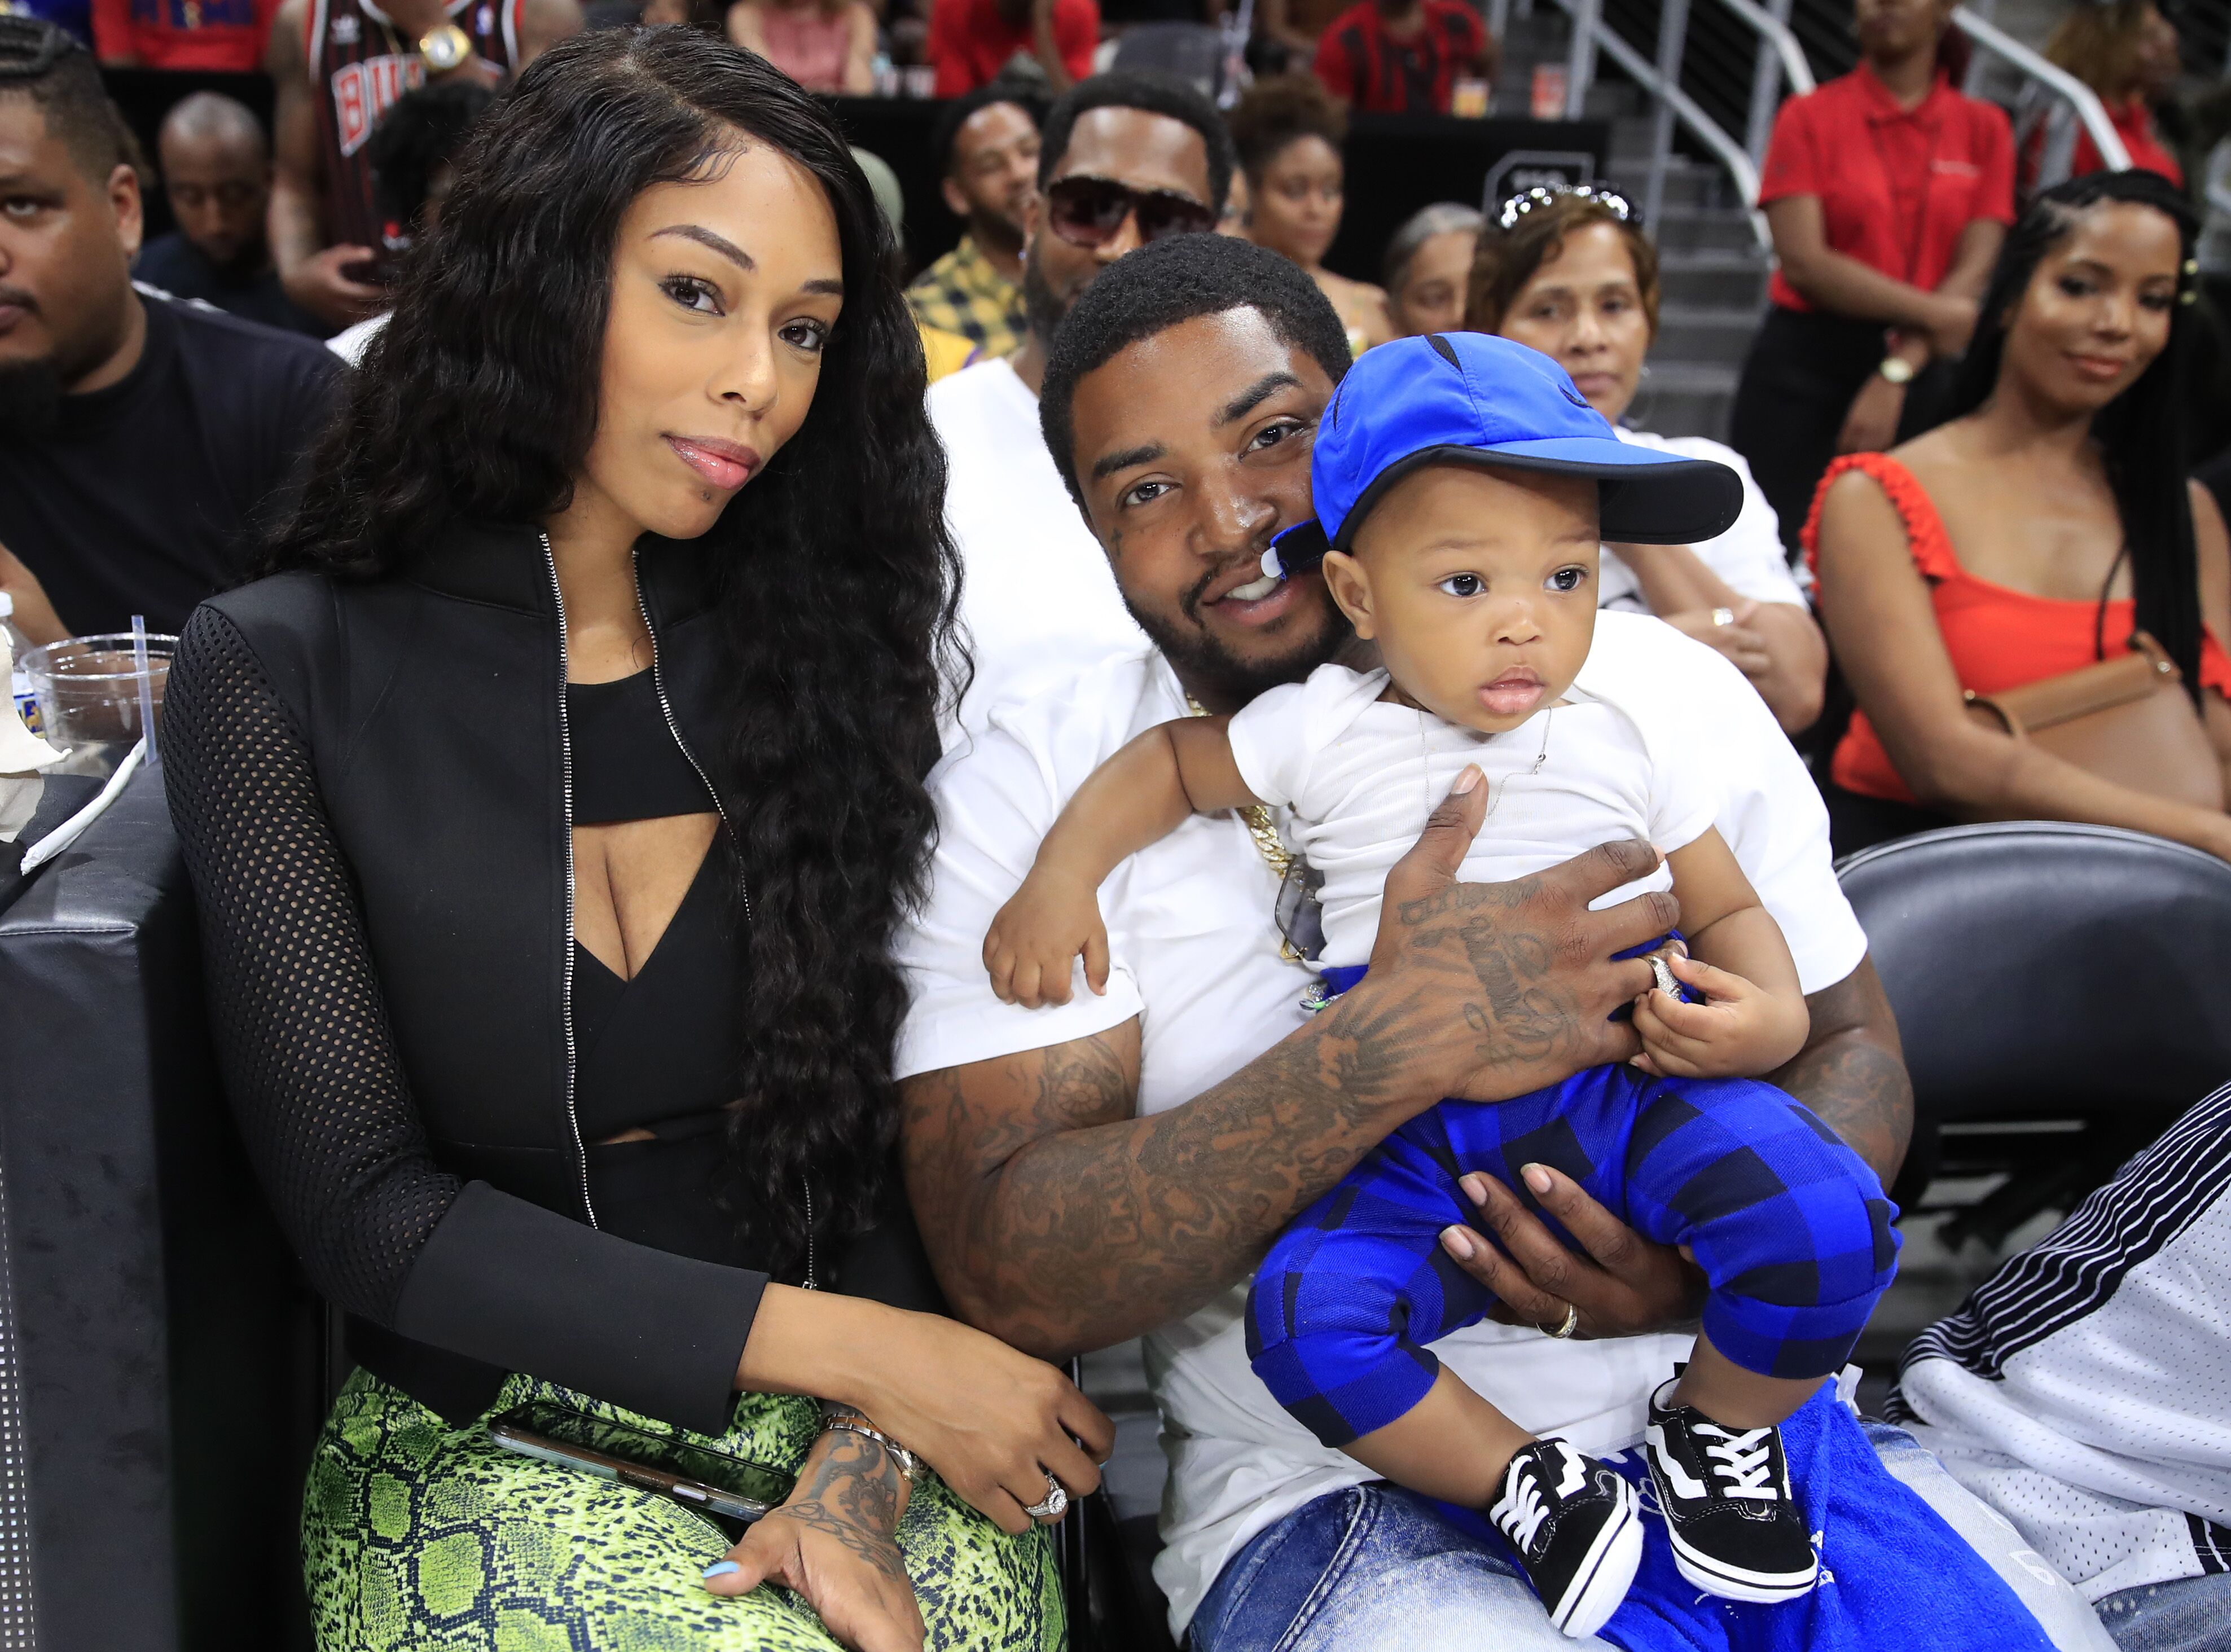 Lil Scrappy and Bambi Benson attend an NBA game with their son Prince Breland | Source: Getty Images